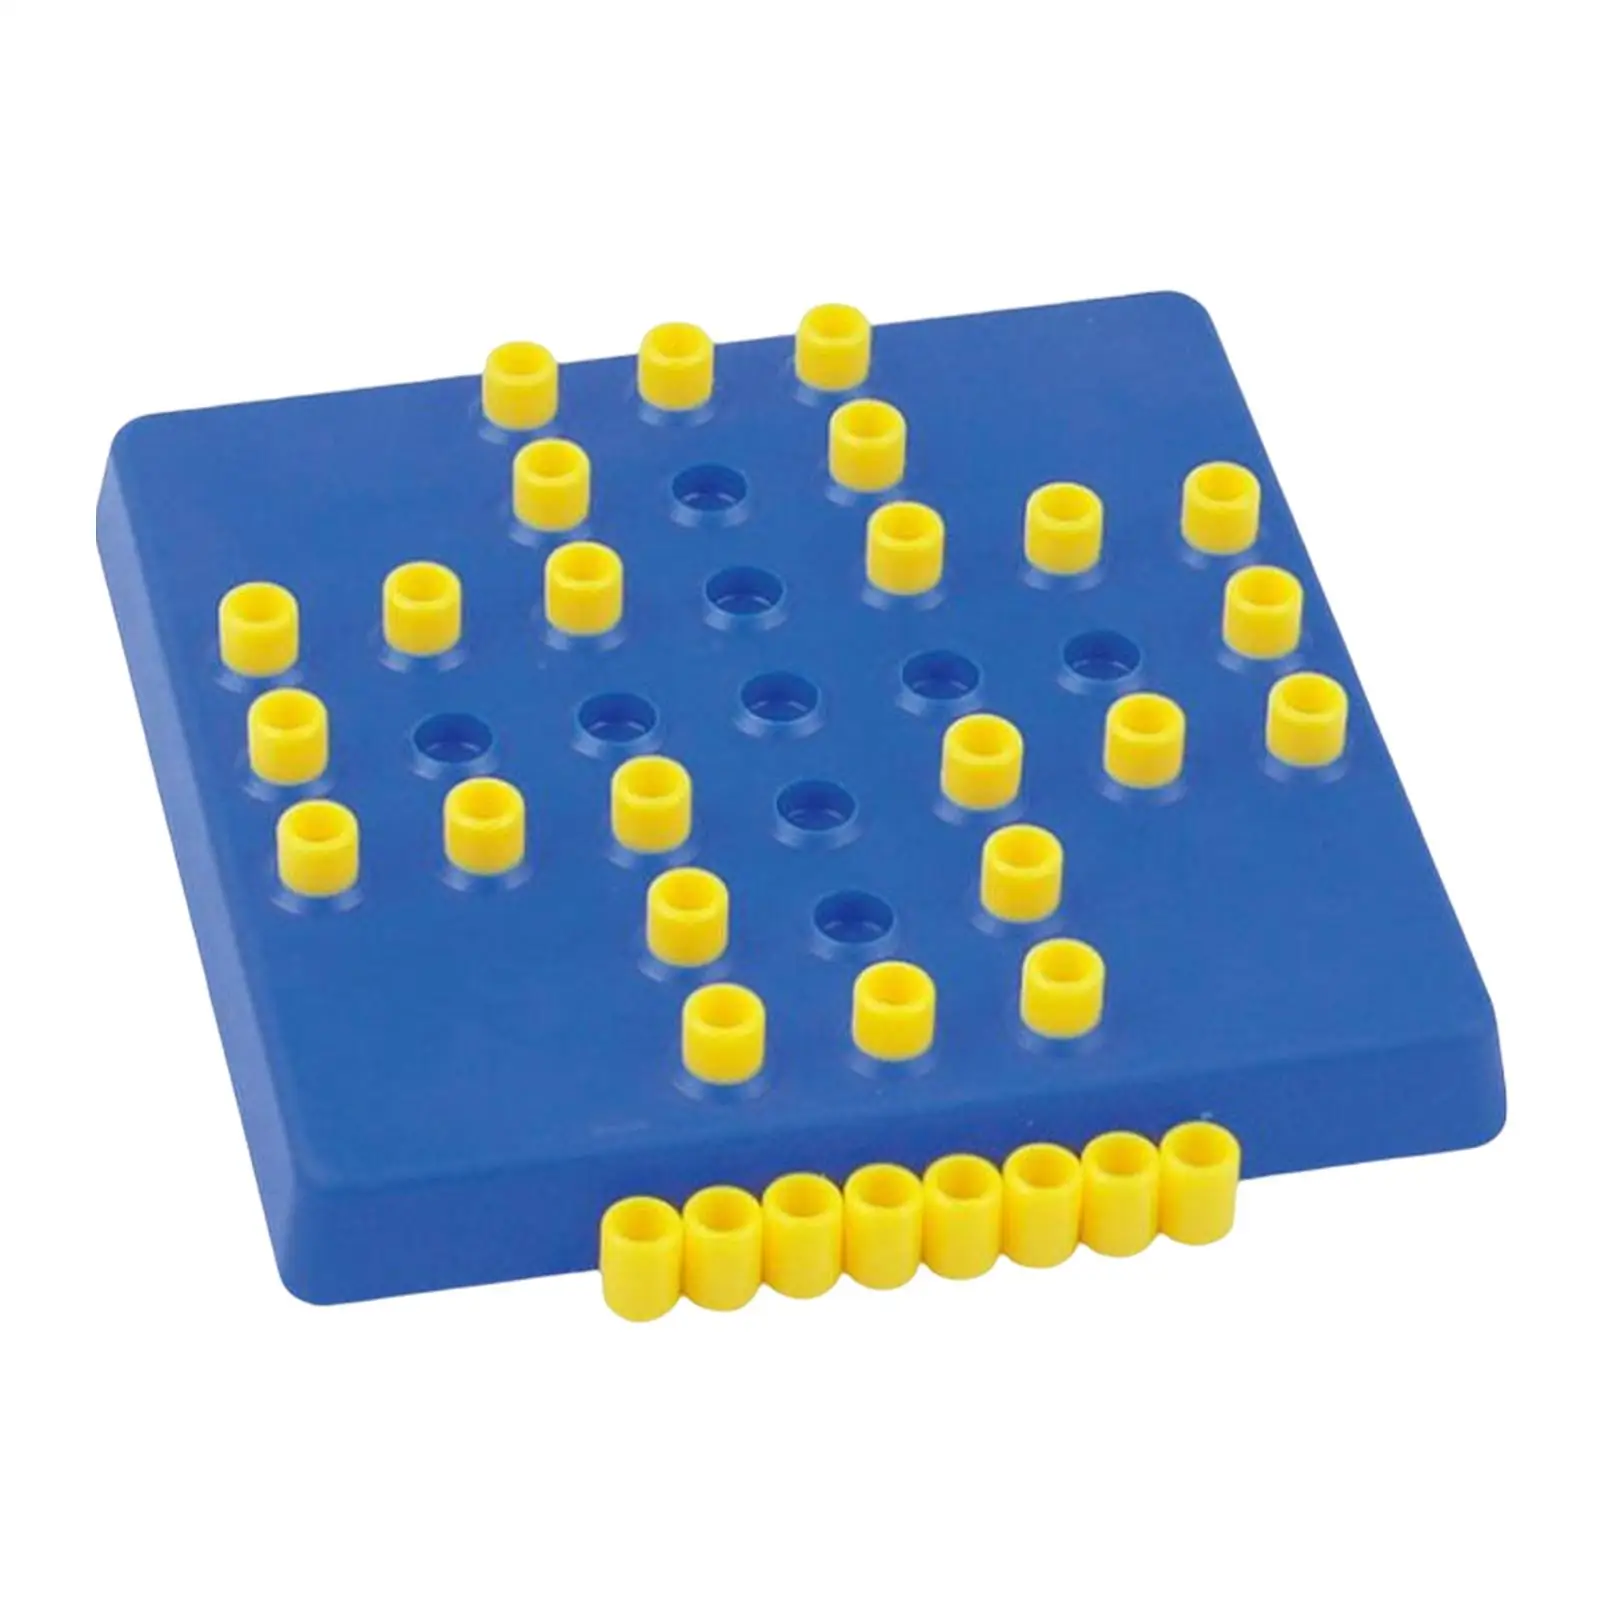 Classic Marble Solitaire Board Game Developing Puzzle Toy Tic TAC Toe for Outdoor